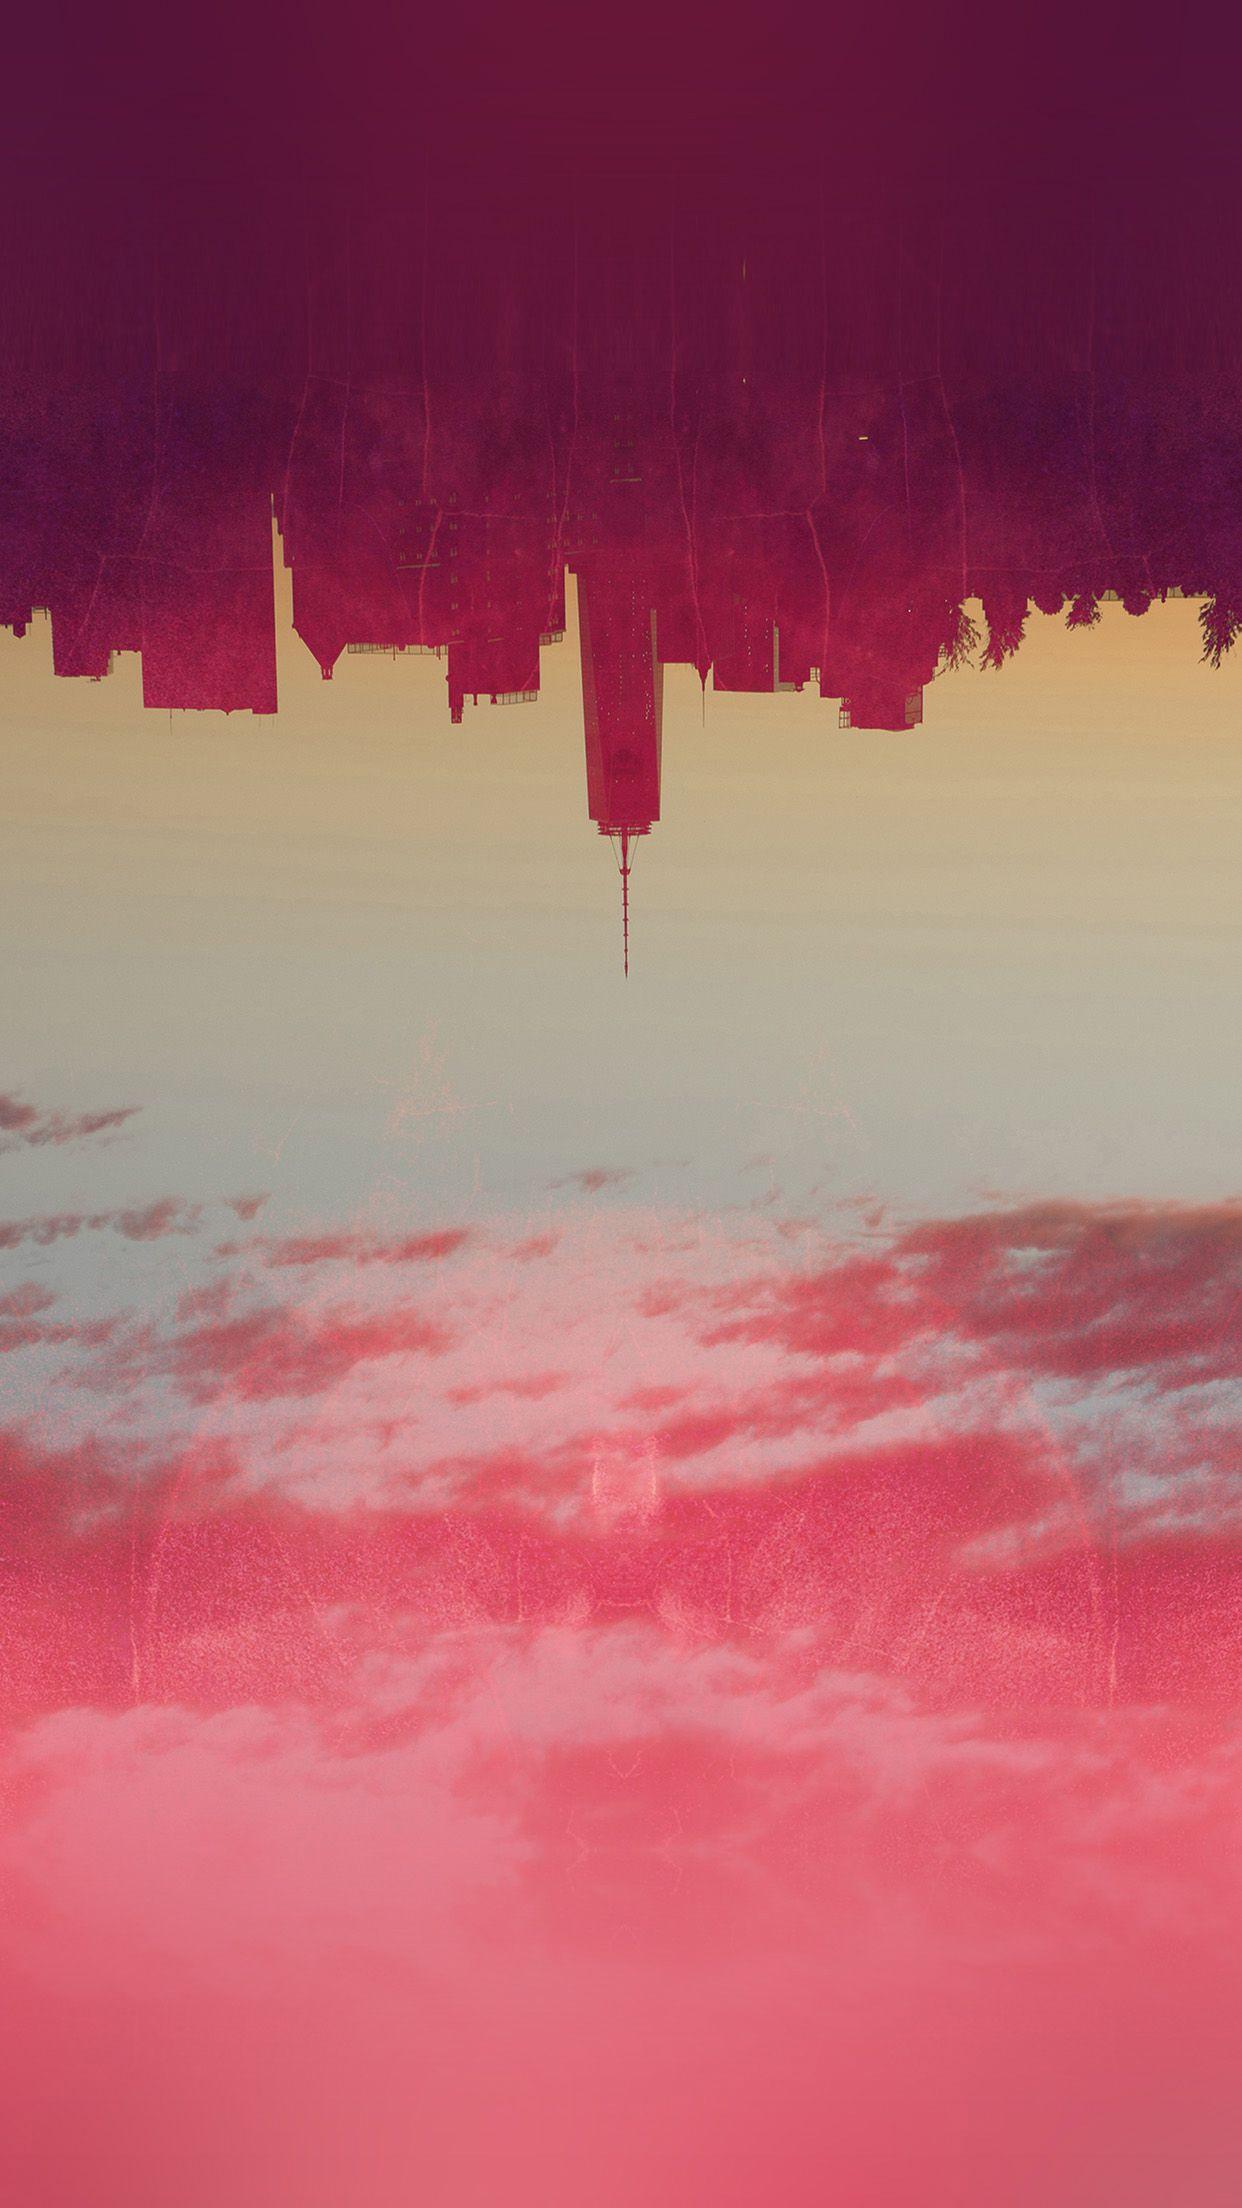 Upside Down City Pink Vintage Fantasy Android Wallpapers free download